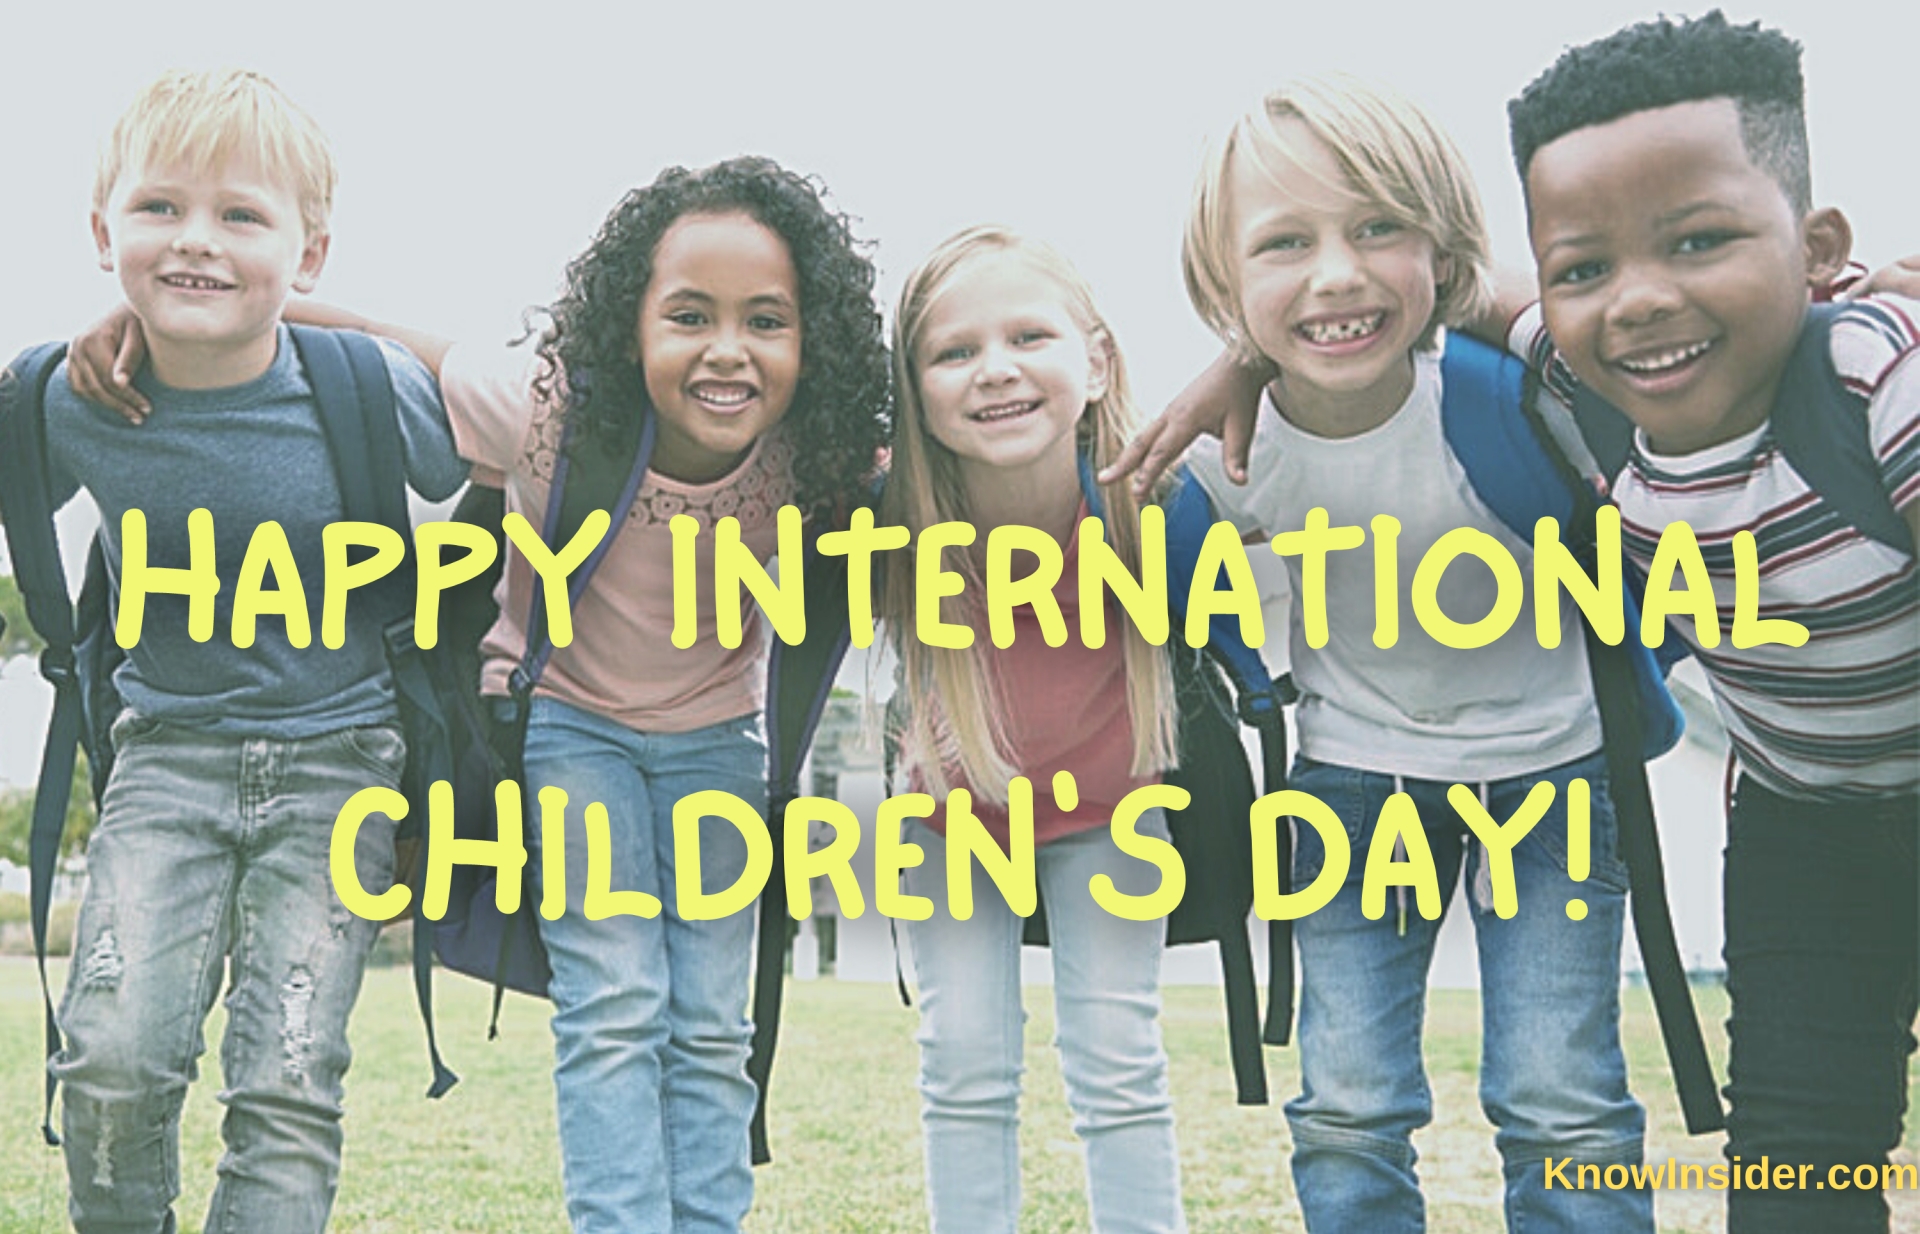 Children’s Day: History, Significance and Celebration Around the World